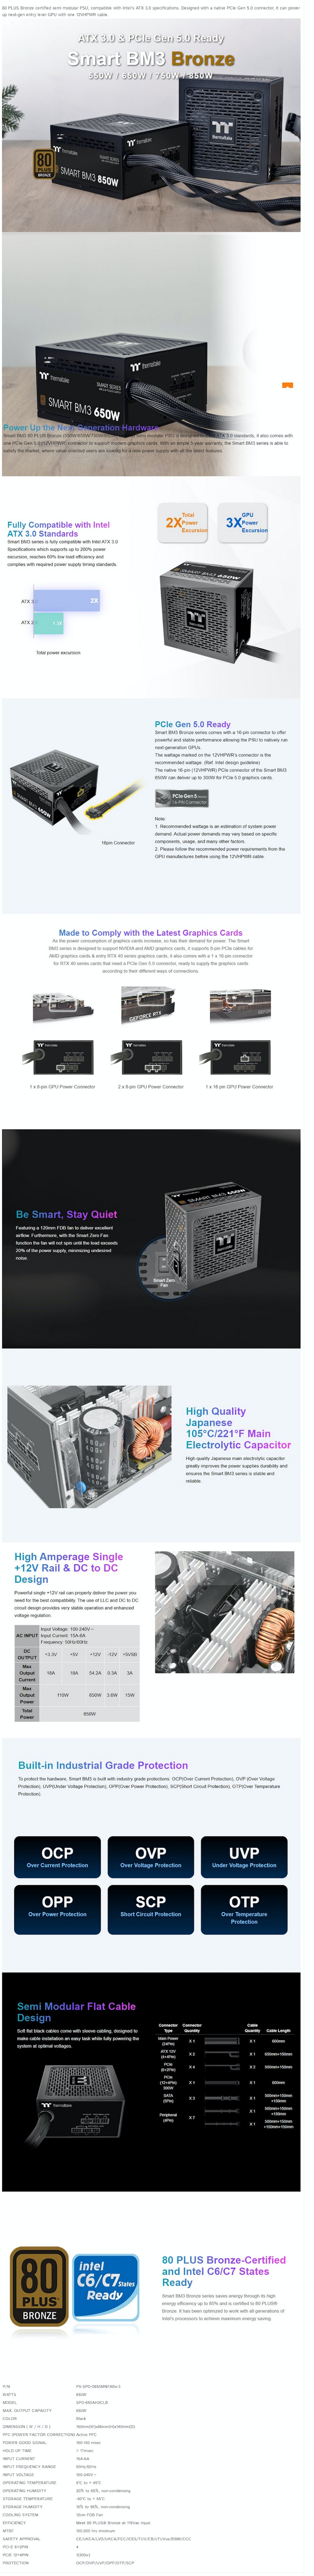 A large marketing image providing additional information about the product Thermaltake Smart BM3 - 750W 80PLUS Bronze PCIe 5.0 ATX  Semi-Modular PSU - Additional alt info not provided